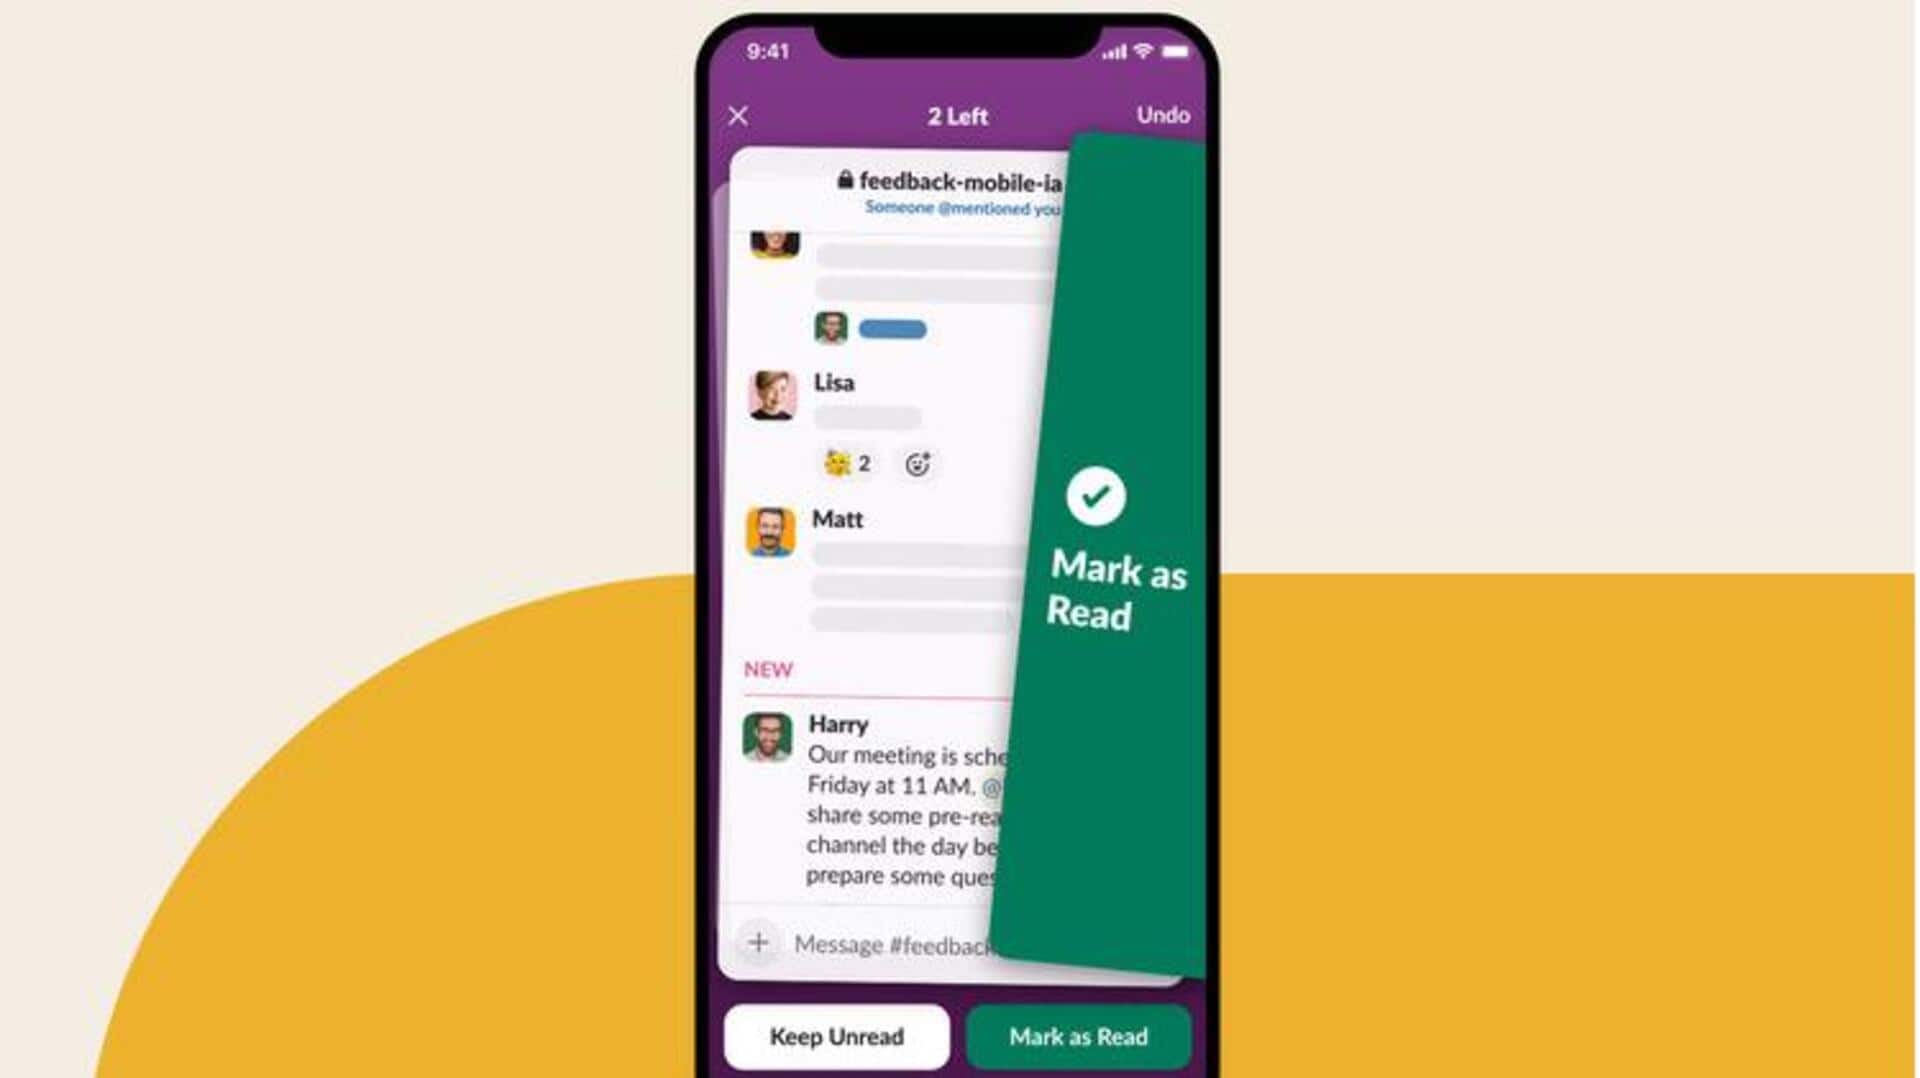 Slack introduces Tinder-inspired left-swipe feature for mobile app